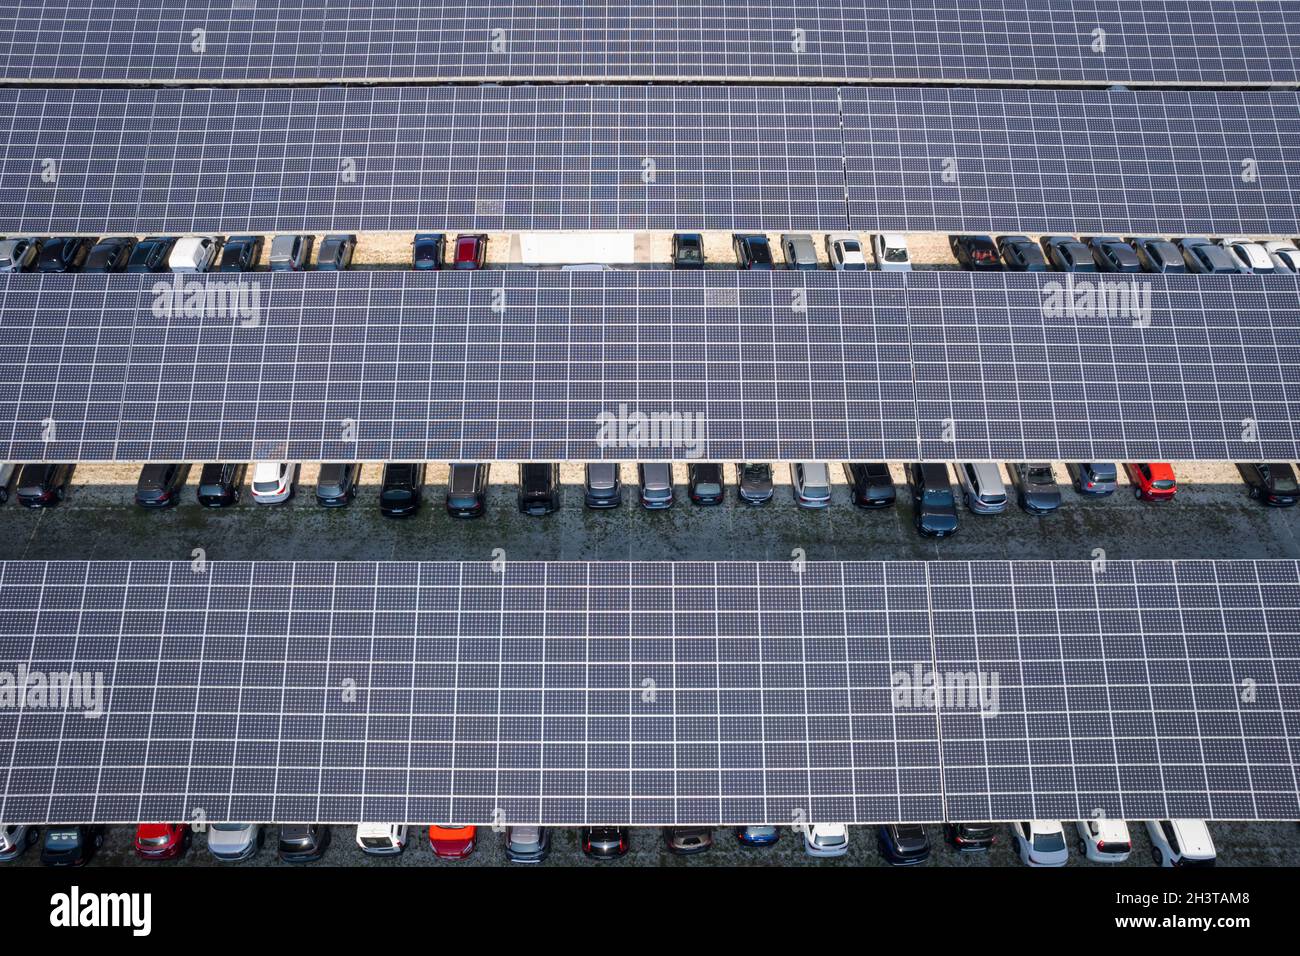 Aerial view of a car park with solar panels. Rimini, Italy - October 2021 Stock Photo